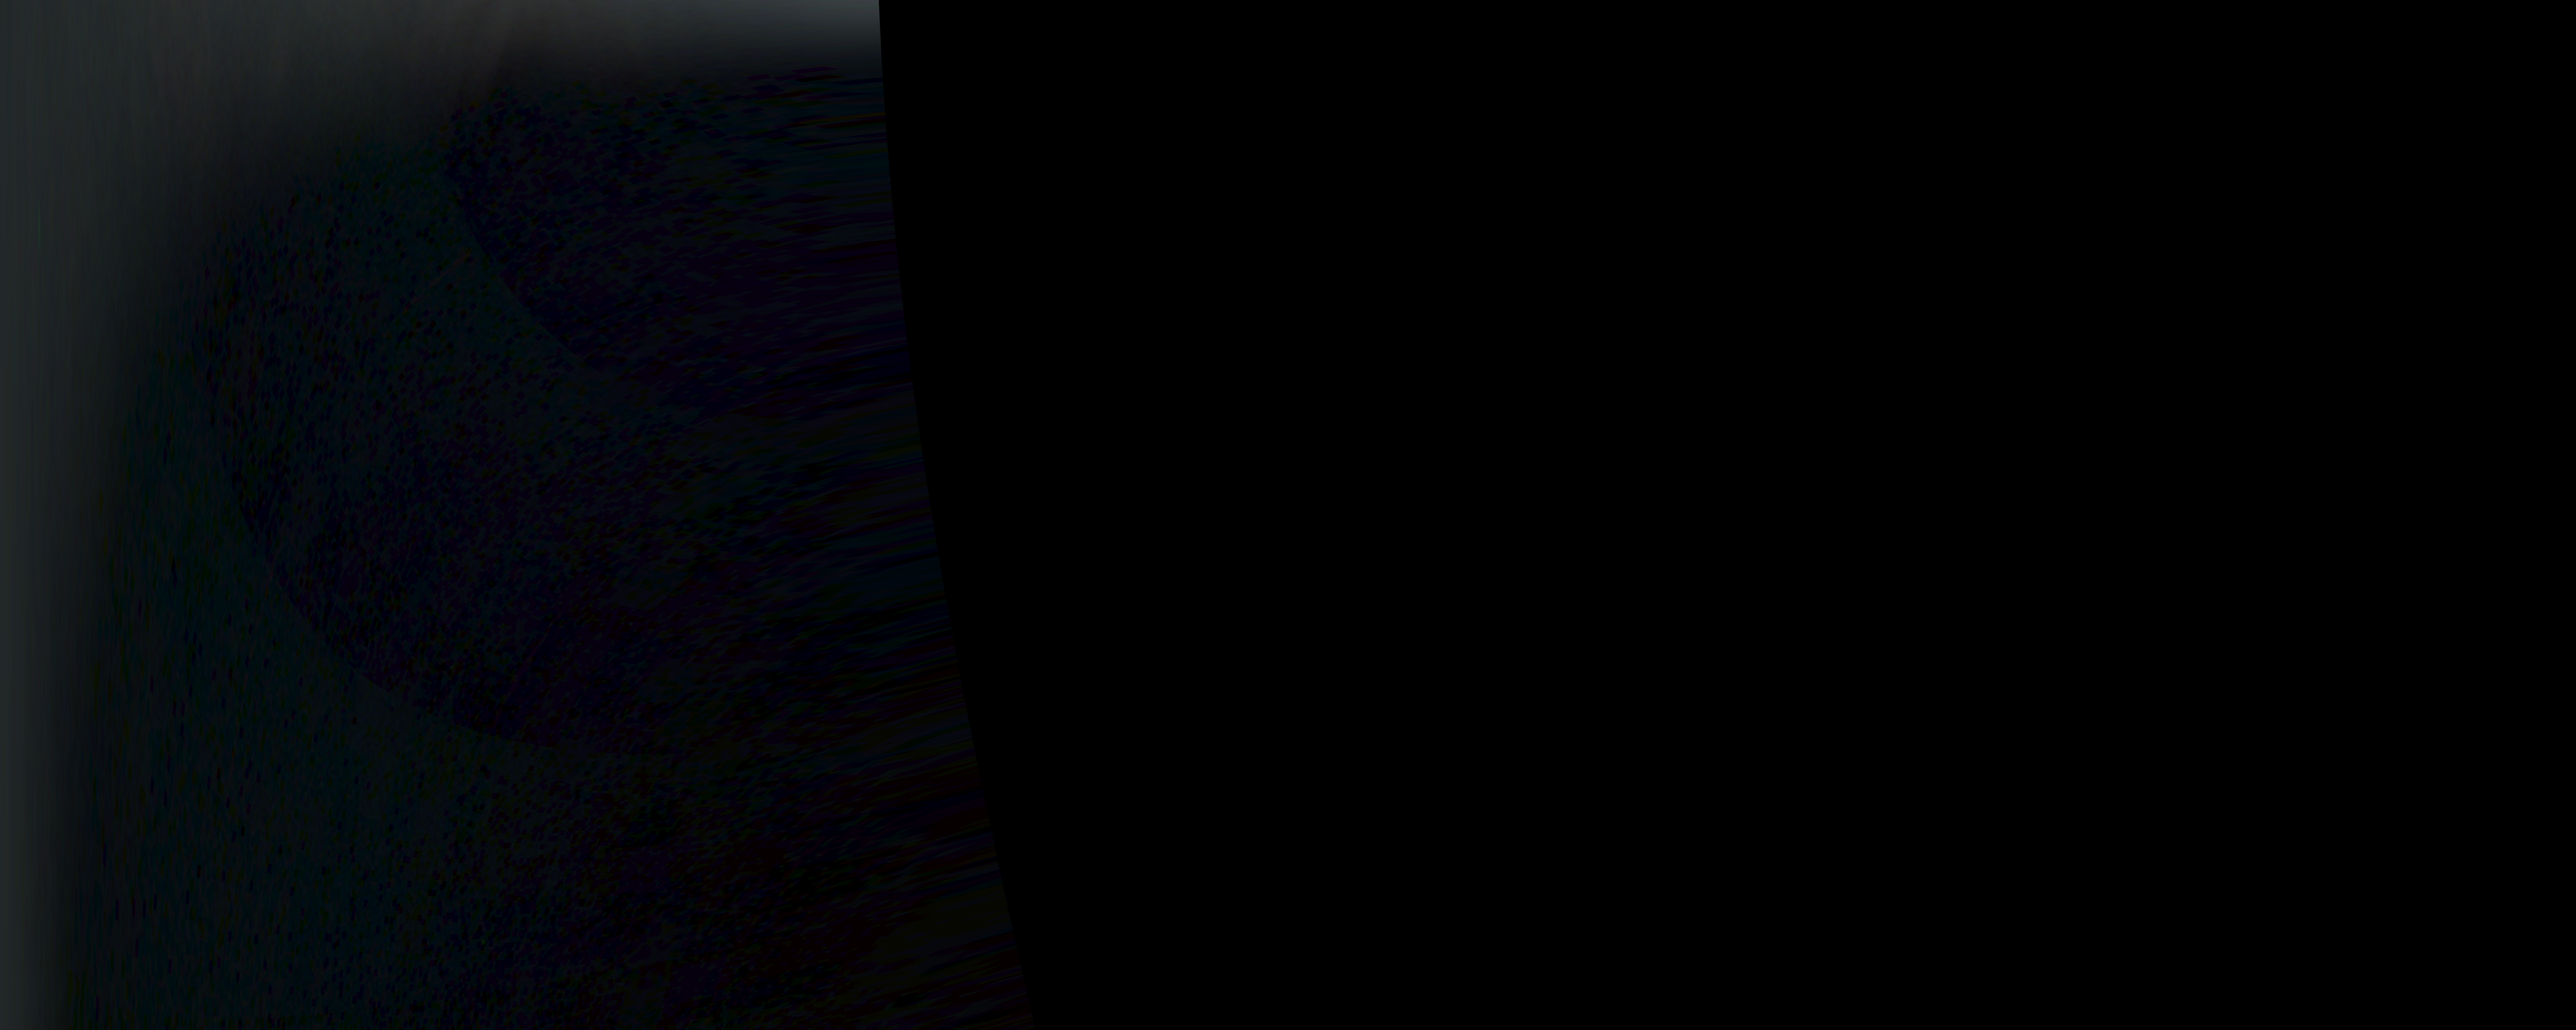 map_JNCE_2017033_04C00113_V01-raw.bmp_60px_v20170306a000000_decompanded.png